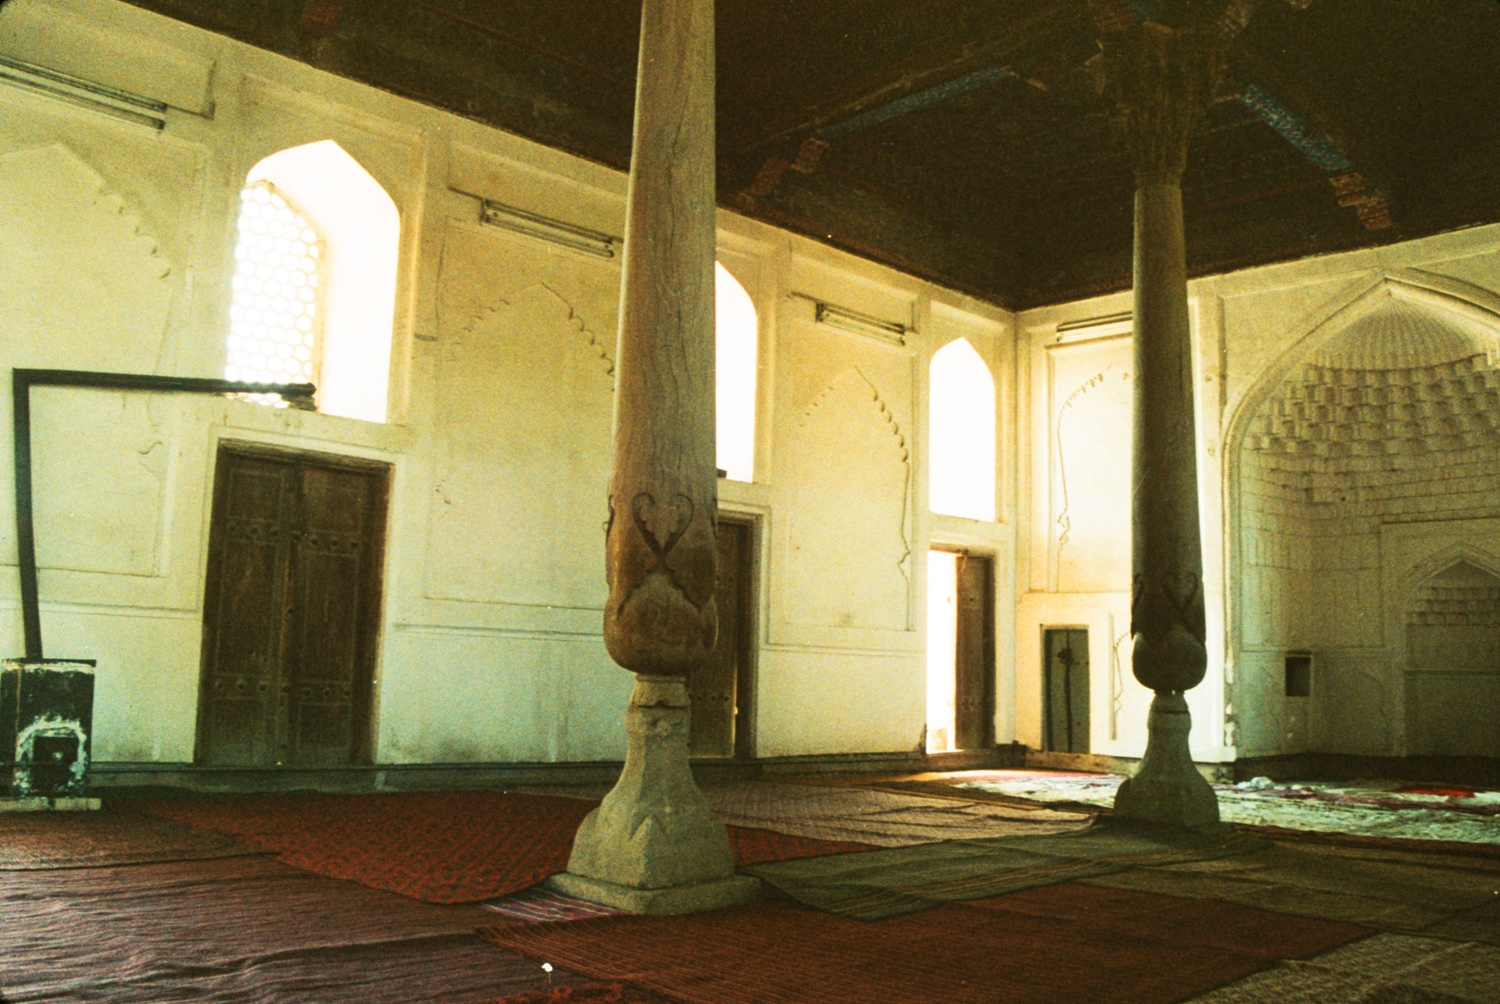 Interior view of winter masjid, mihrab to right